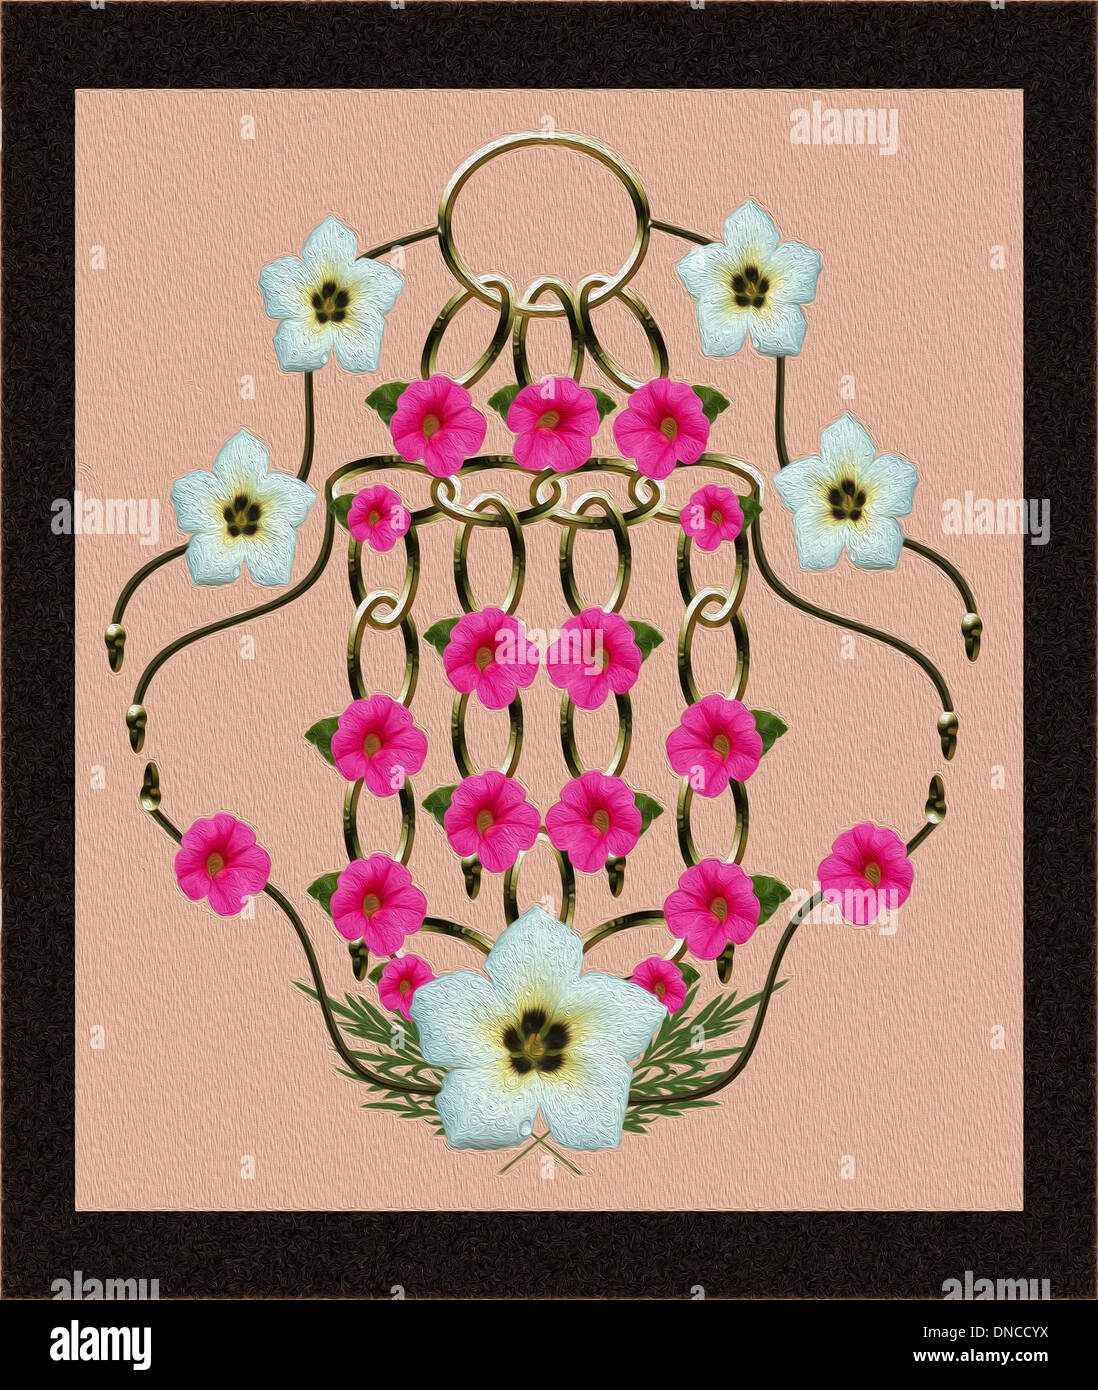 Unique digital floral art with bright pink / red petunias and white turnera flowers linked by ornate golden metallic chain Stock Photo